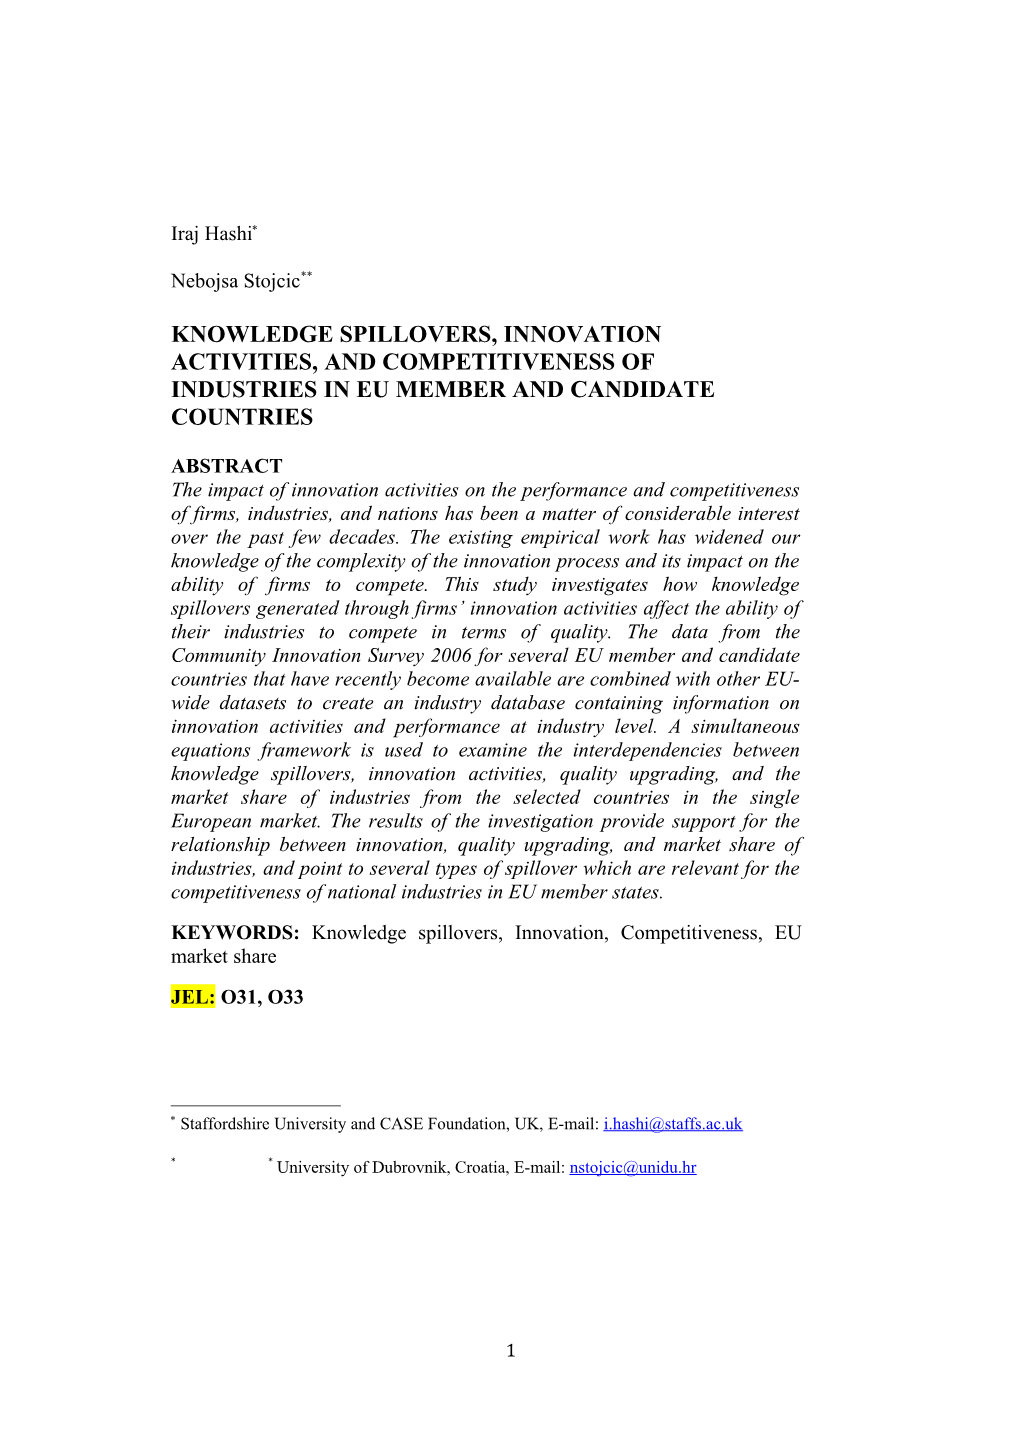 Knowledge Spillovers, Innovation Activities, and Competitiveness of Industries in Eu Member